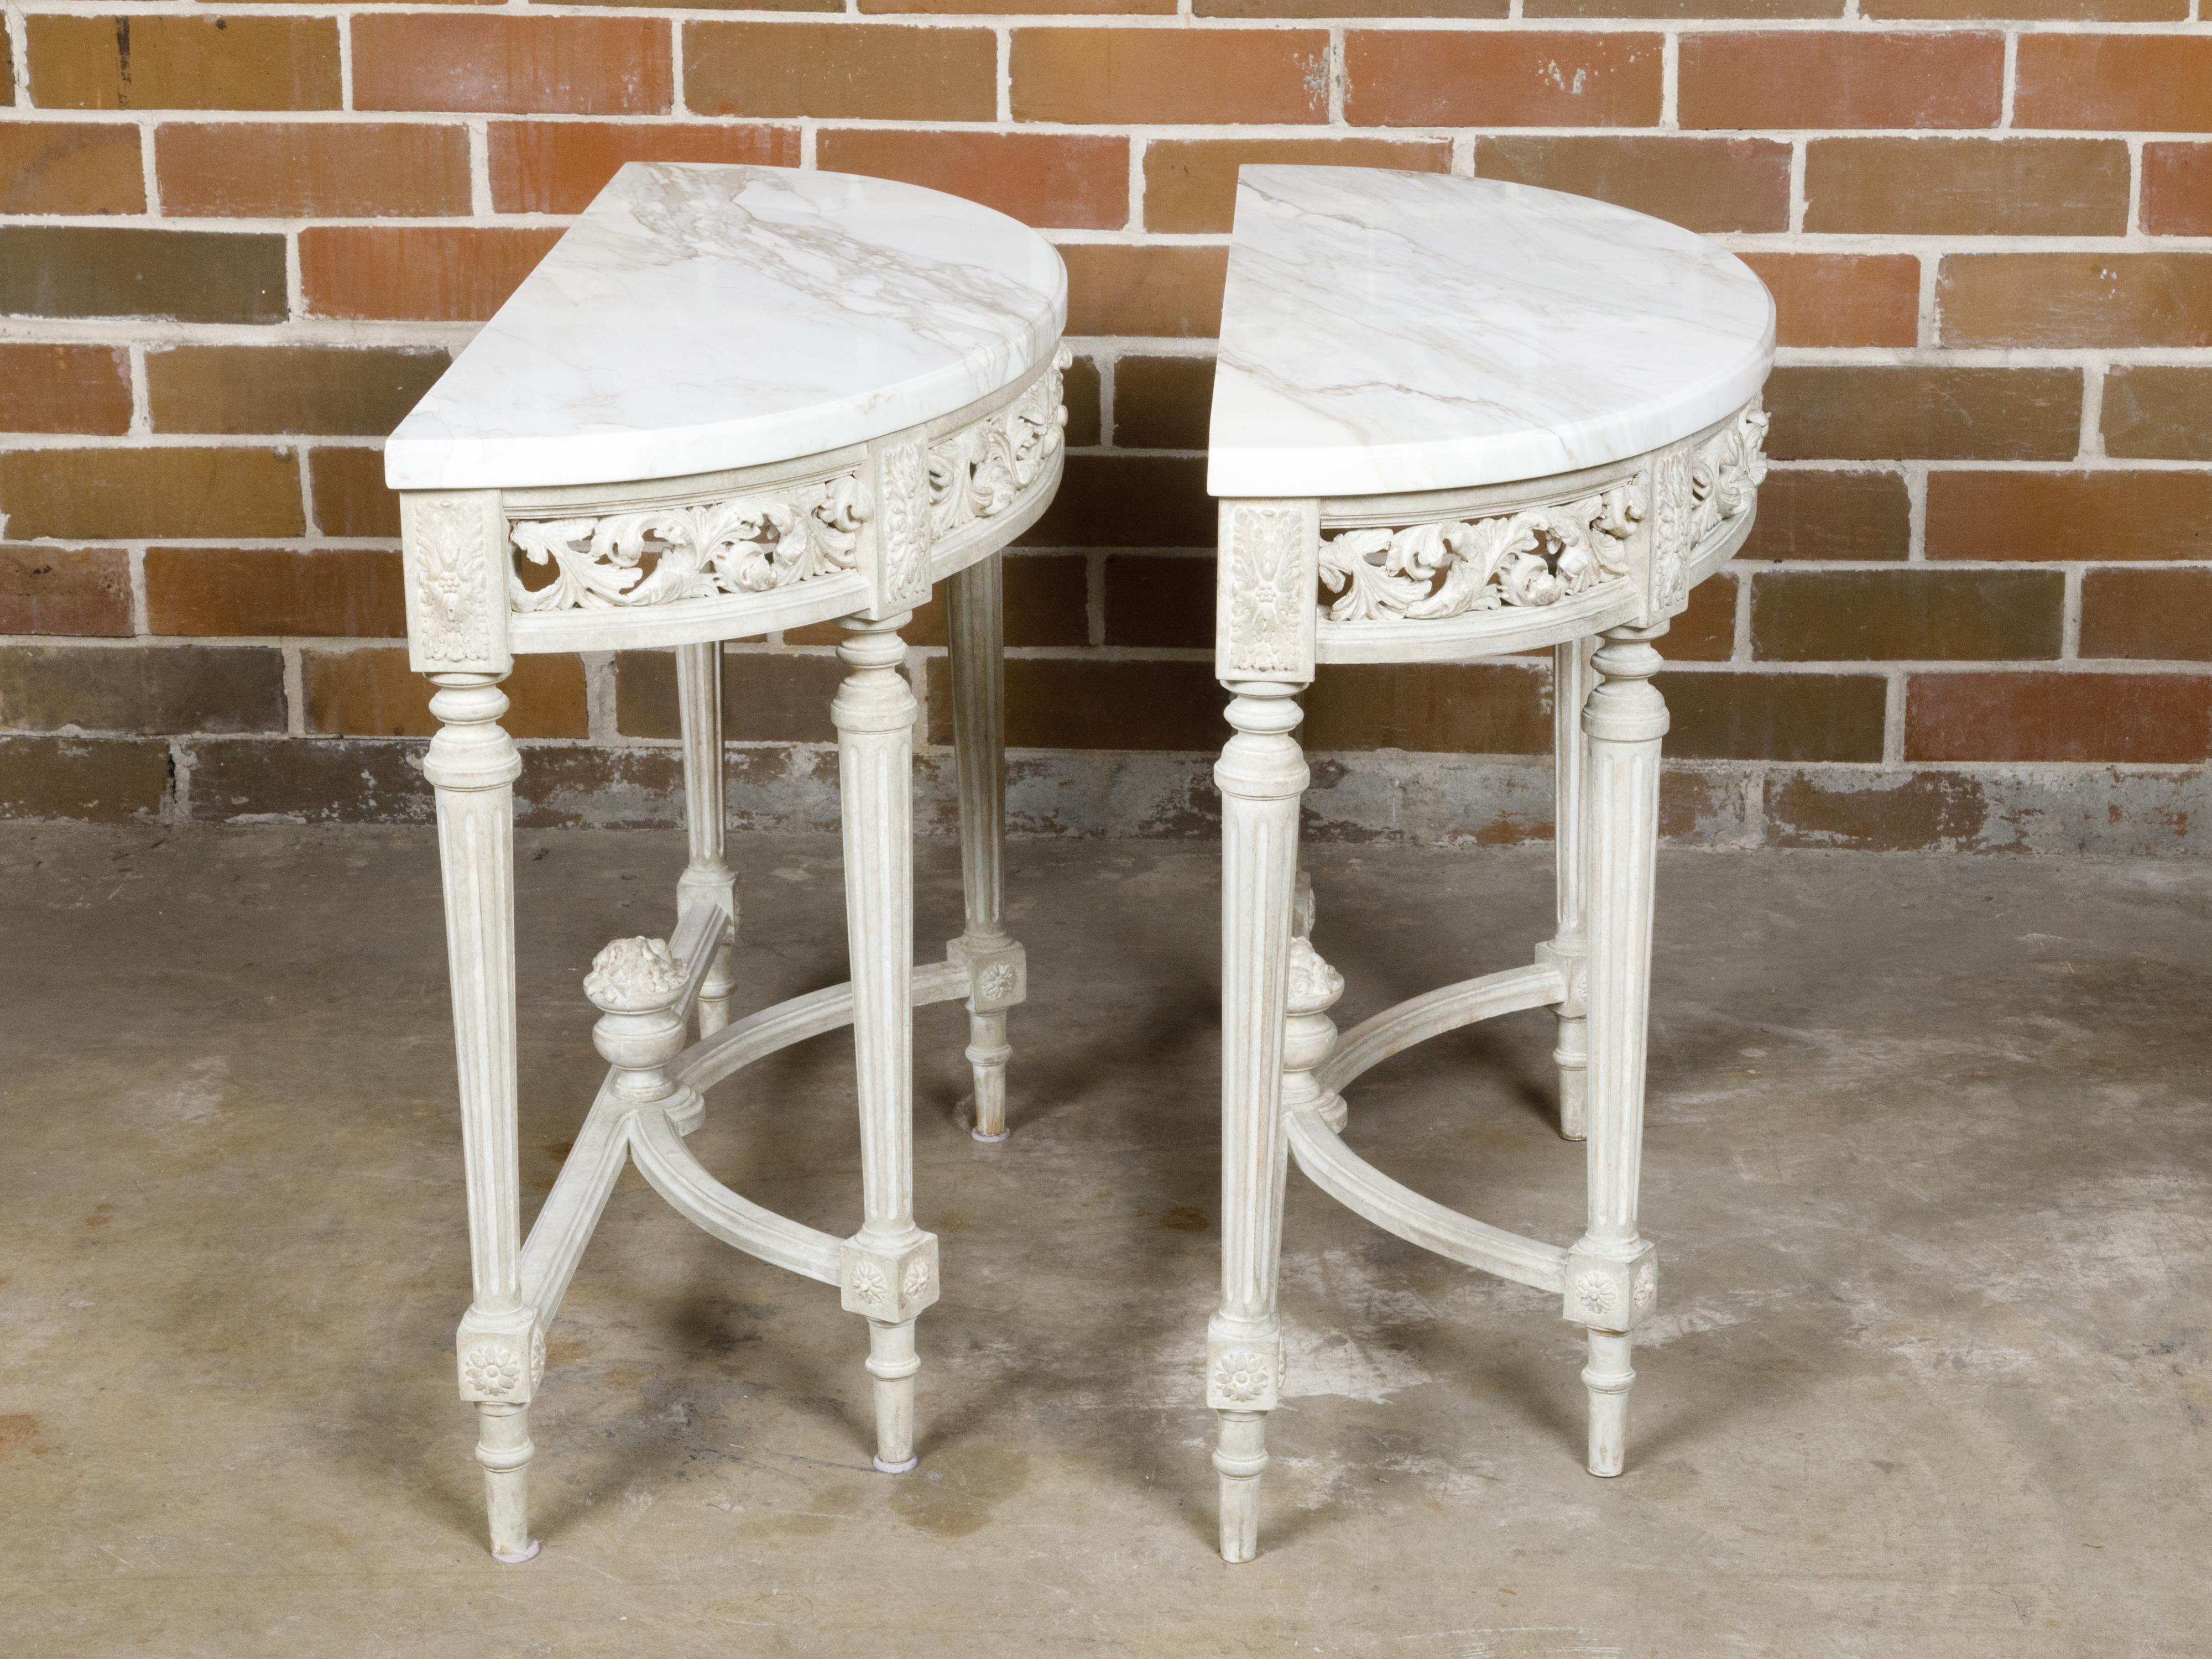 Pair of French Louis XVI Style Painted Demilune Console Tables with Marble Tops For Sale 7